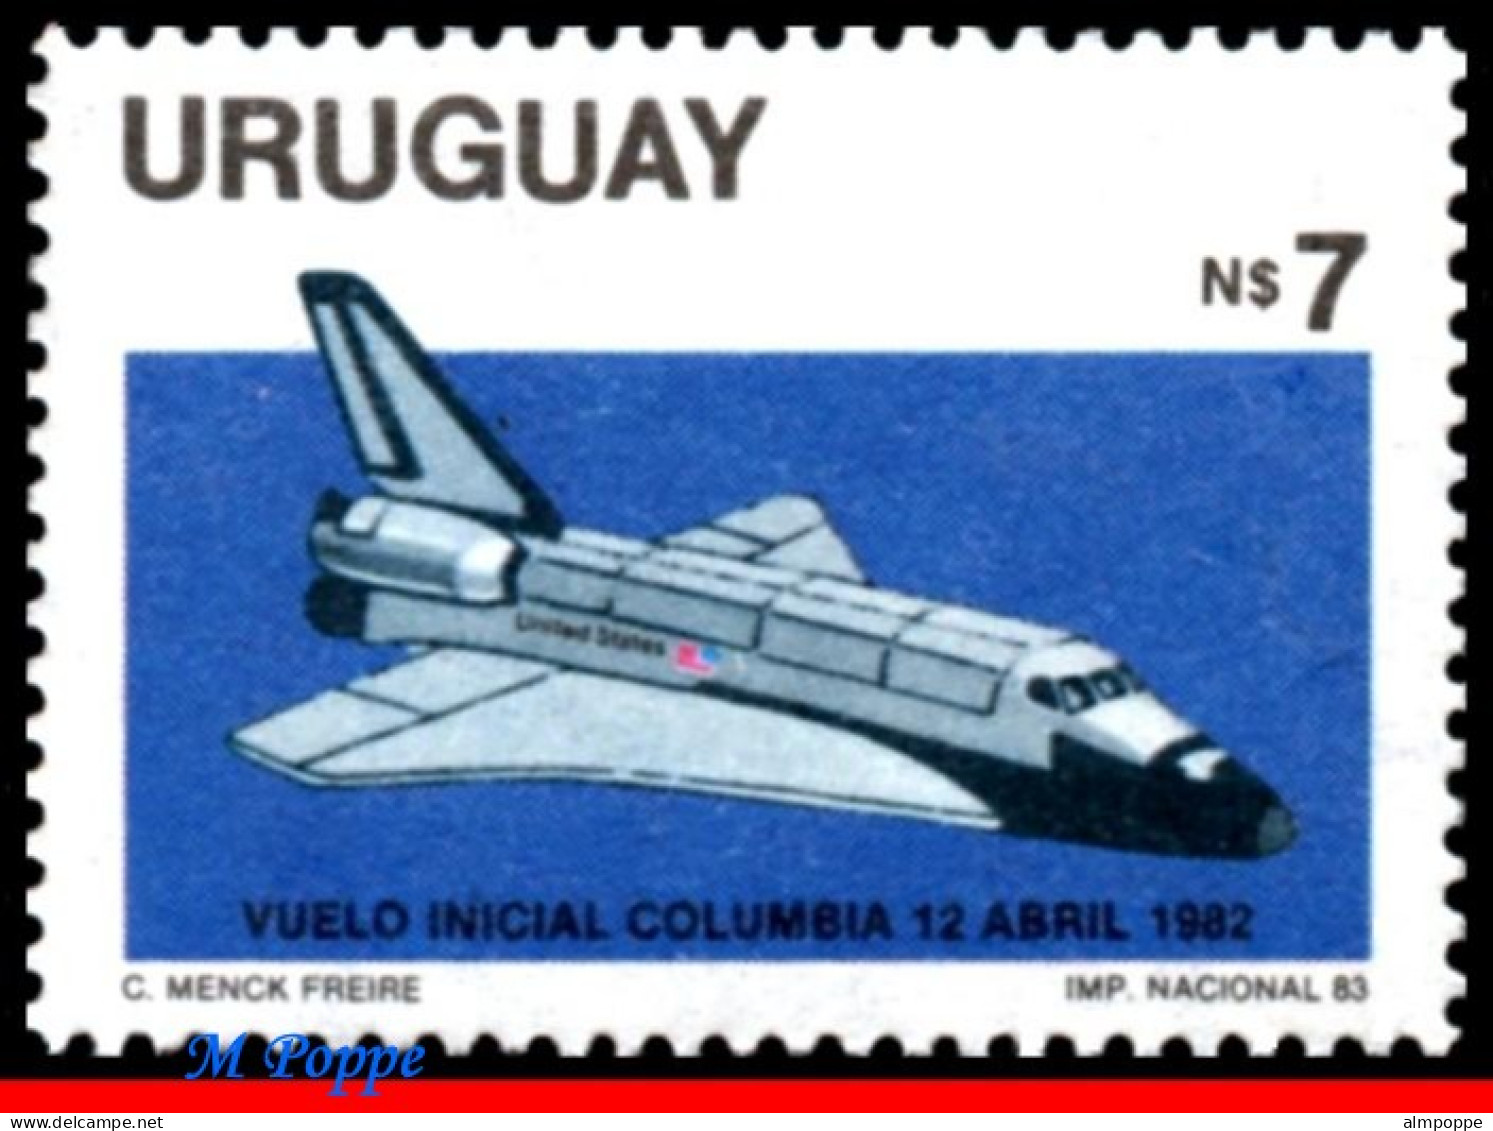 Ref. UR-1147 URUGUAY 1983 - FIRST SPACE SHUTTLEFLIGHT, NAVE COLUMBIA, MNH, SPACE EXPLORATION 1V Sc# 1147 - United States